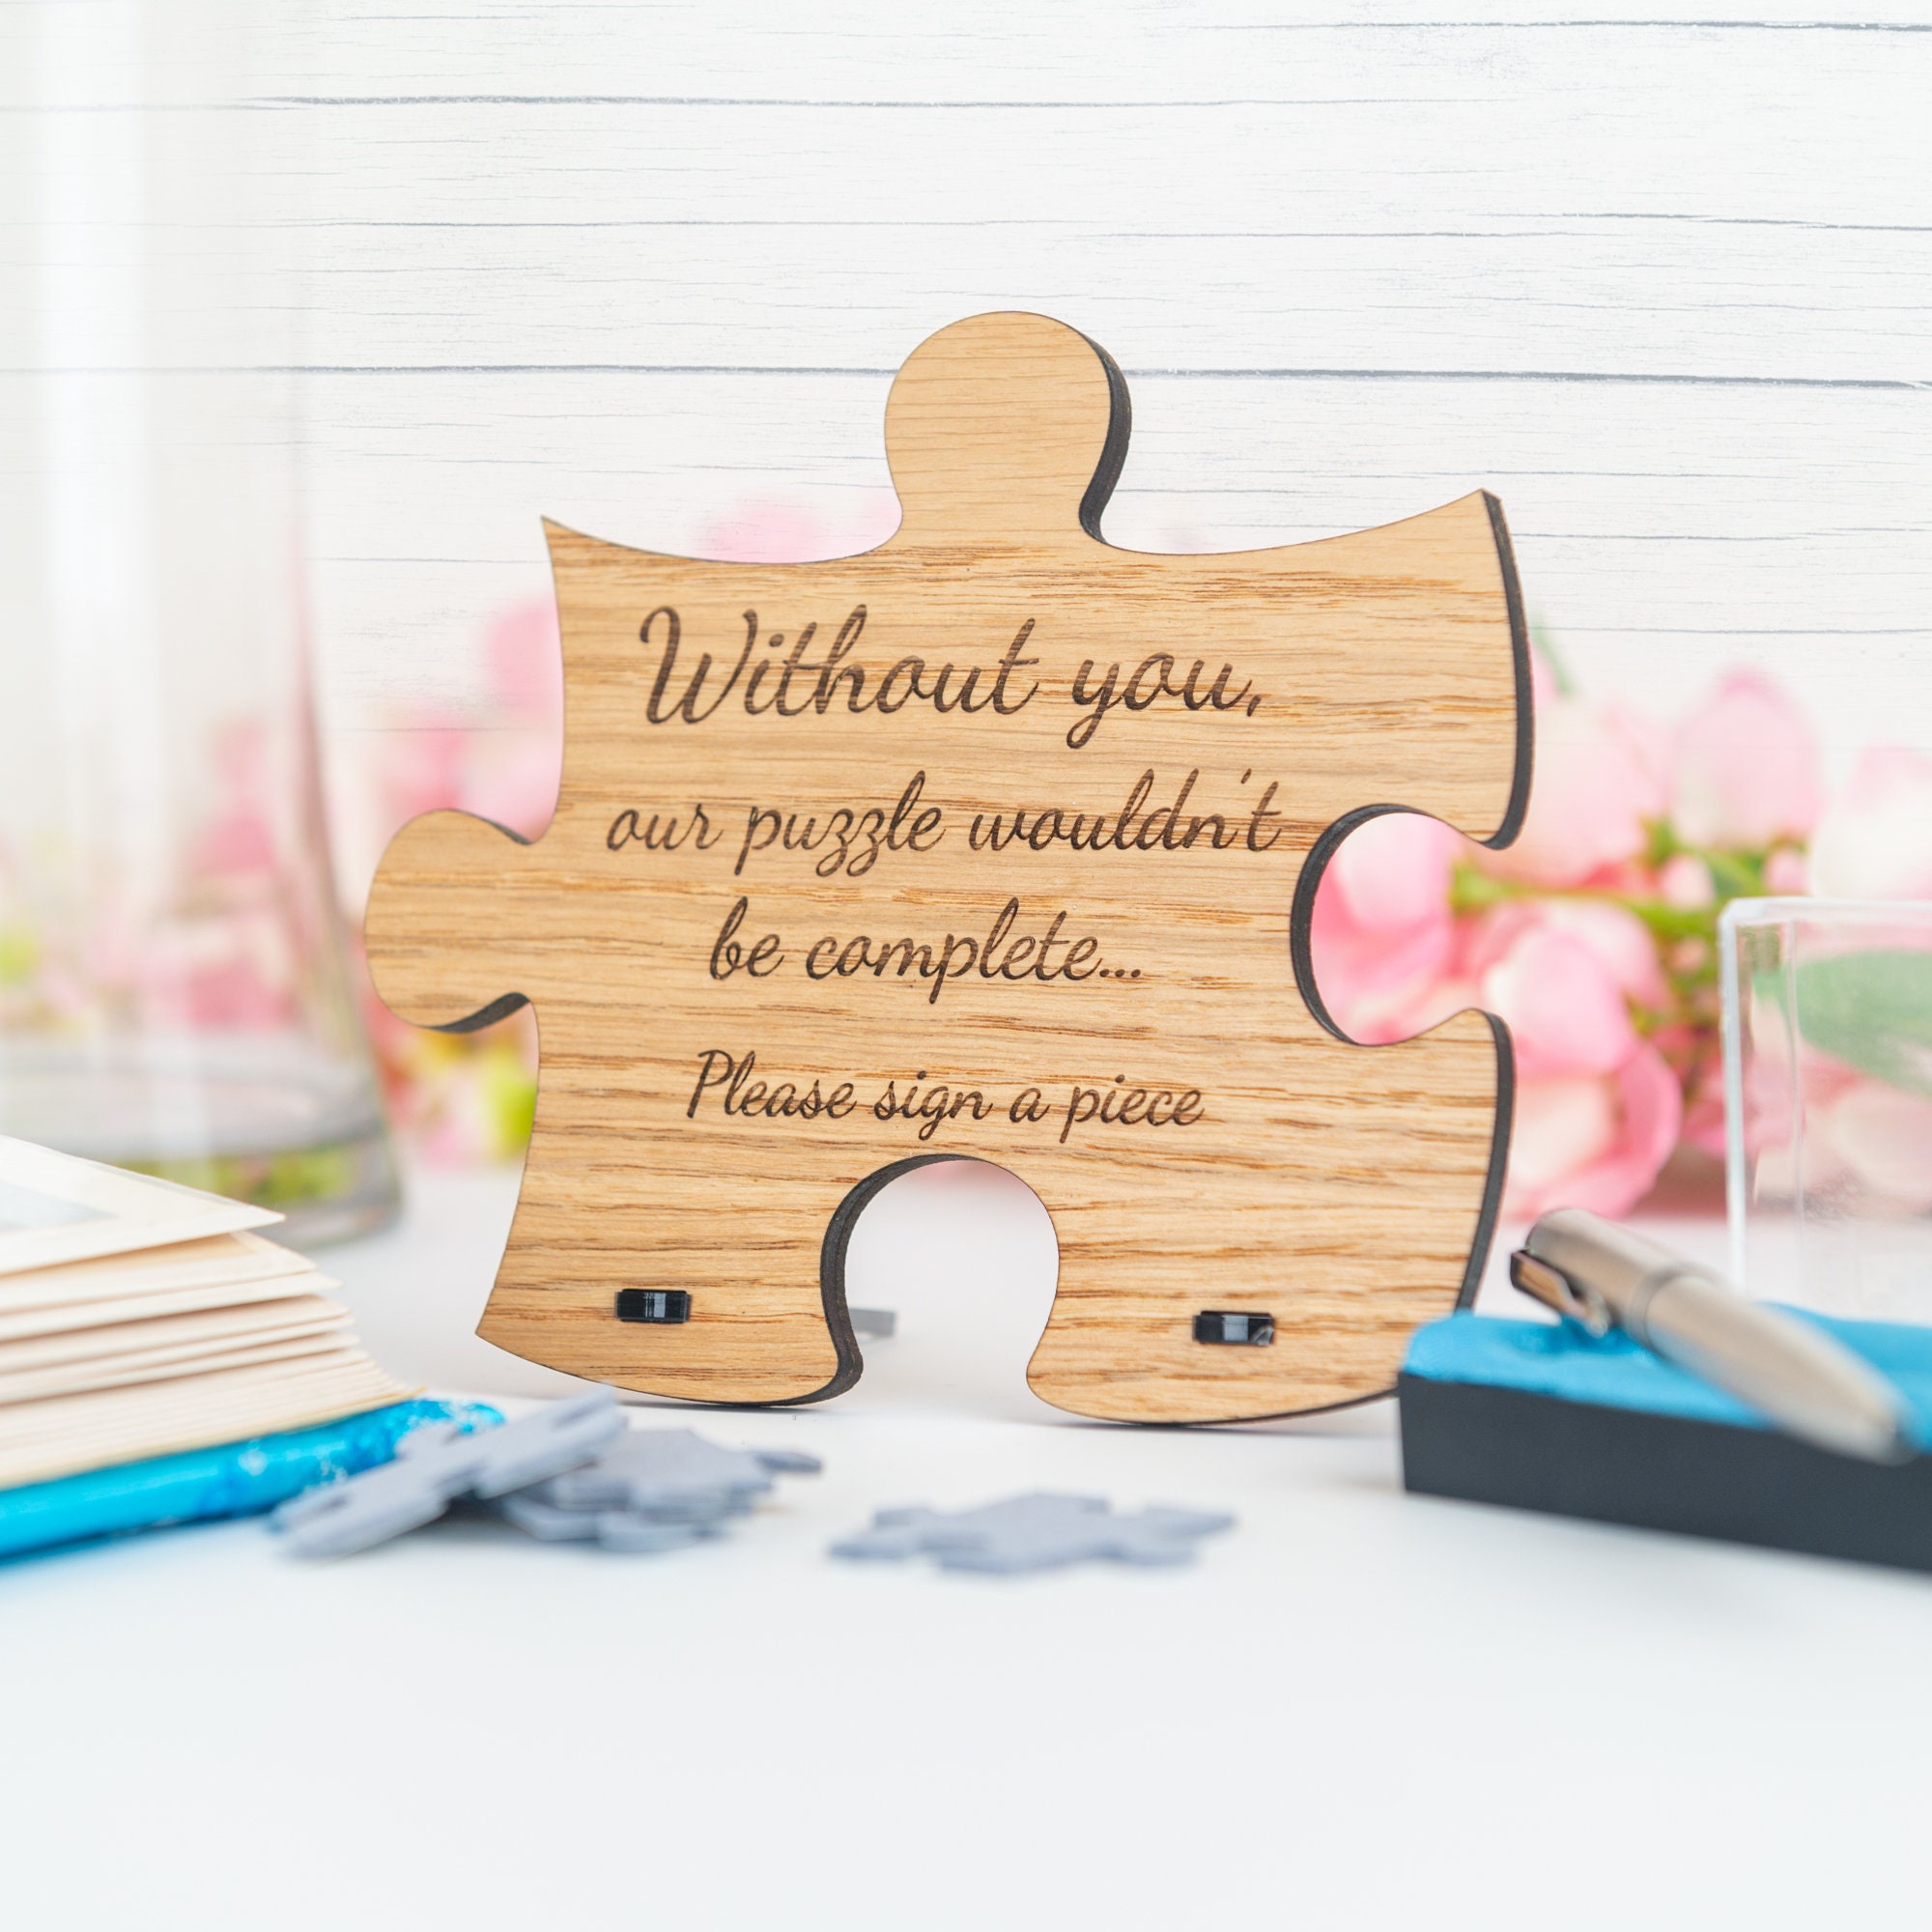 Personalised wooden wedding rose place name guest book jigsaw puzzle keepsake 